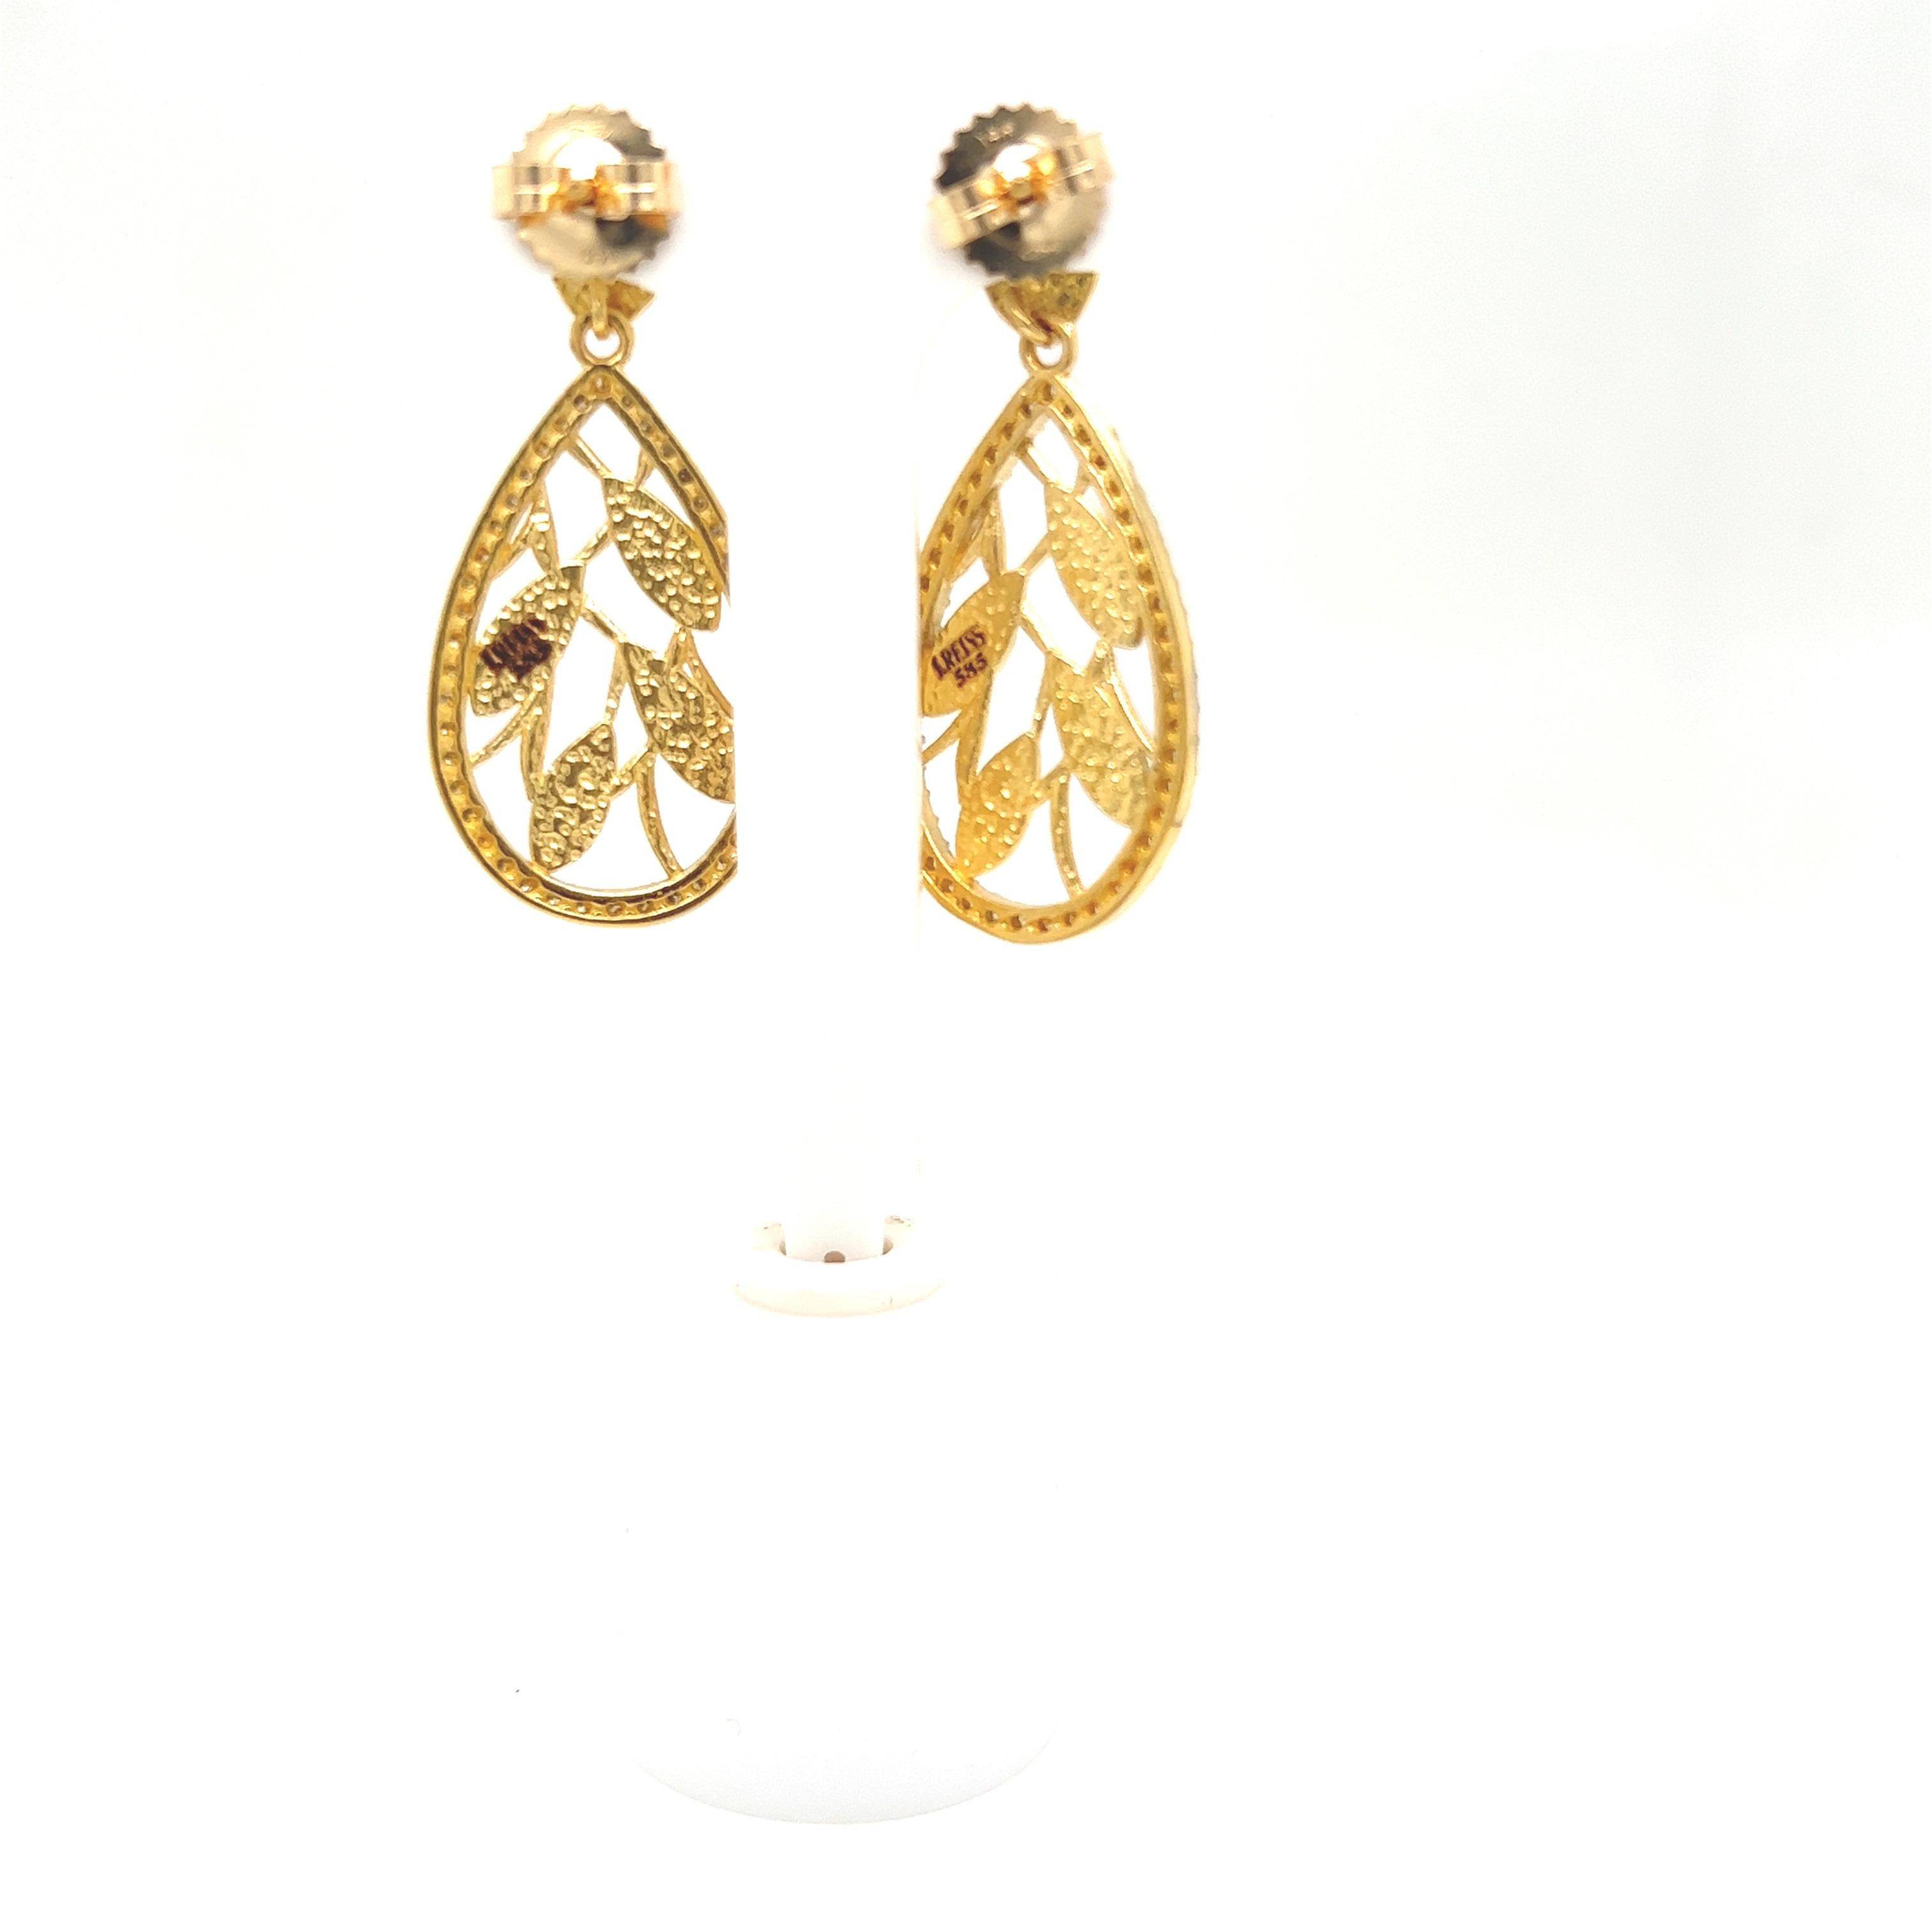 14 Karat Yellow Gold Polish-Finished Dangling Tear-Drop Vine Leaf Earrings, Accented with 0.58 Carats of Pave Set Diamonds.  Post with Friction Closure.
